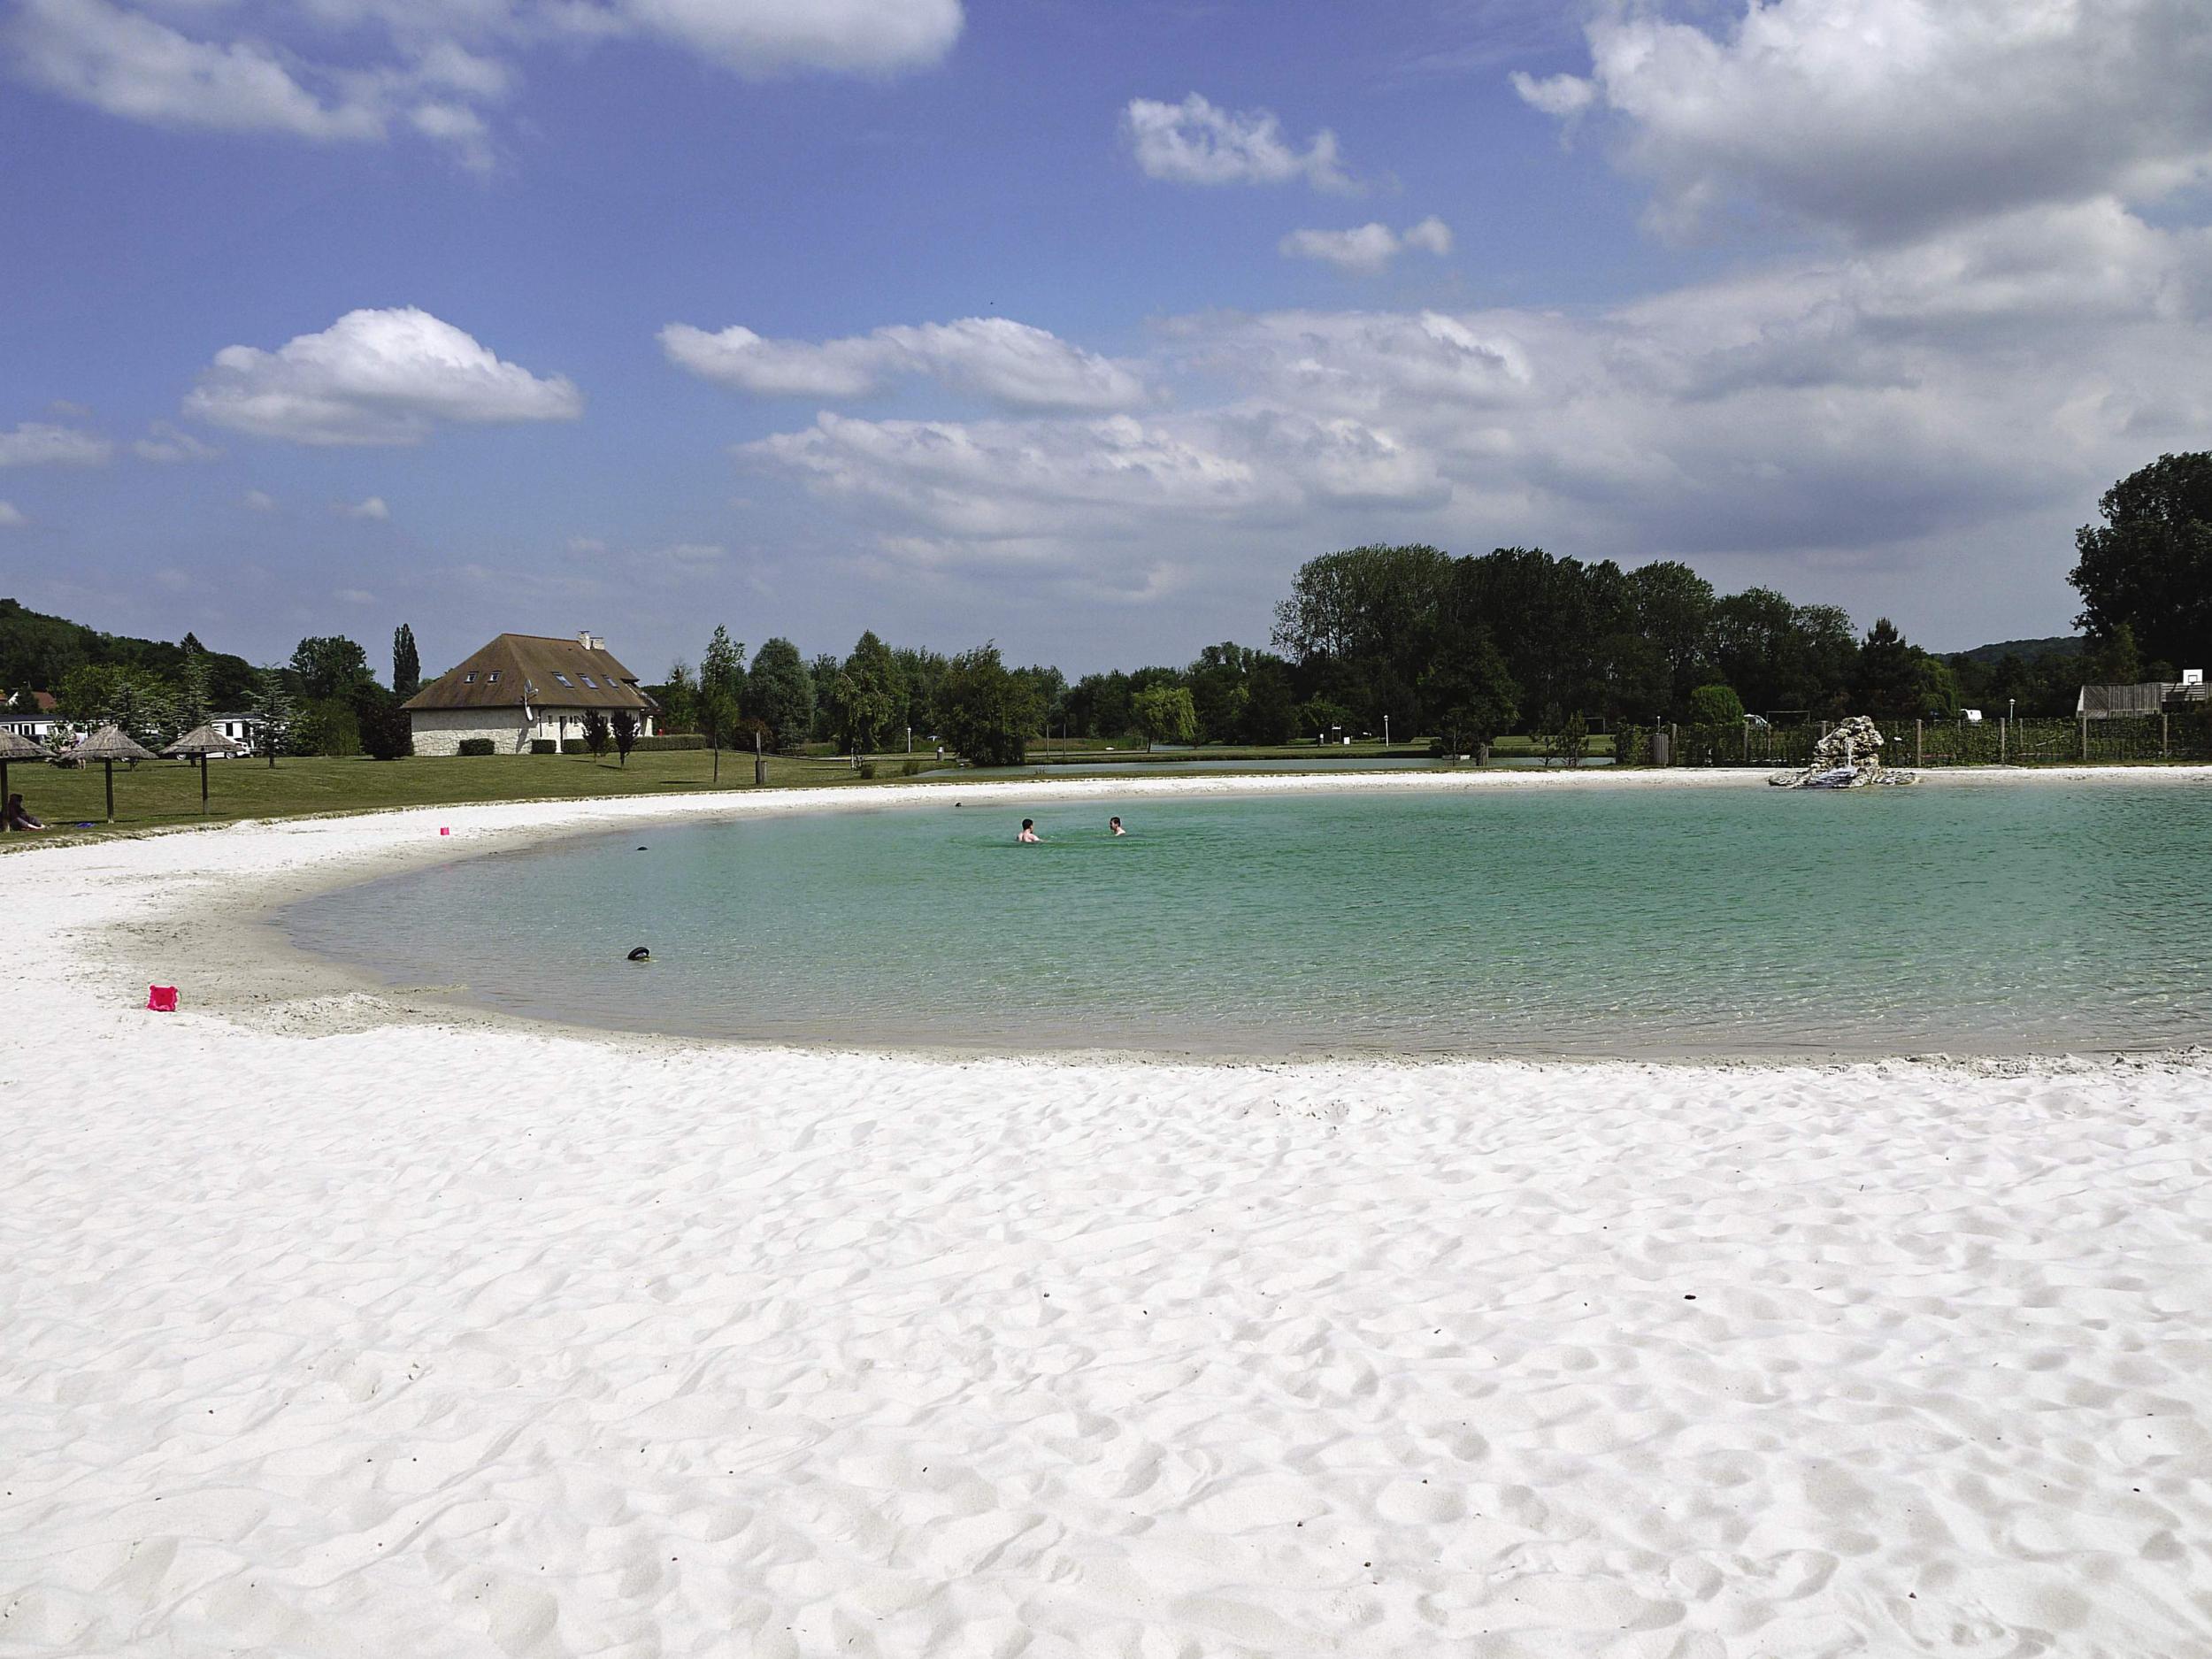 There’s even a man-made, white-sand beach